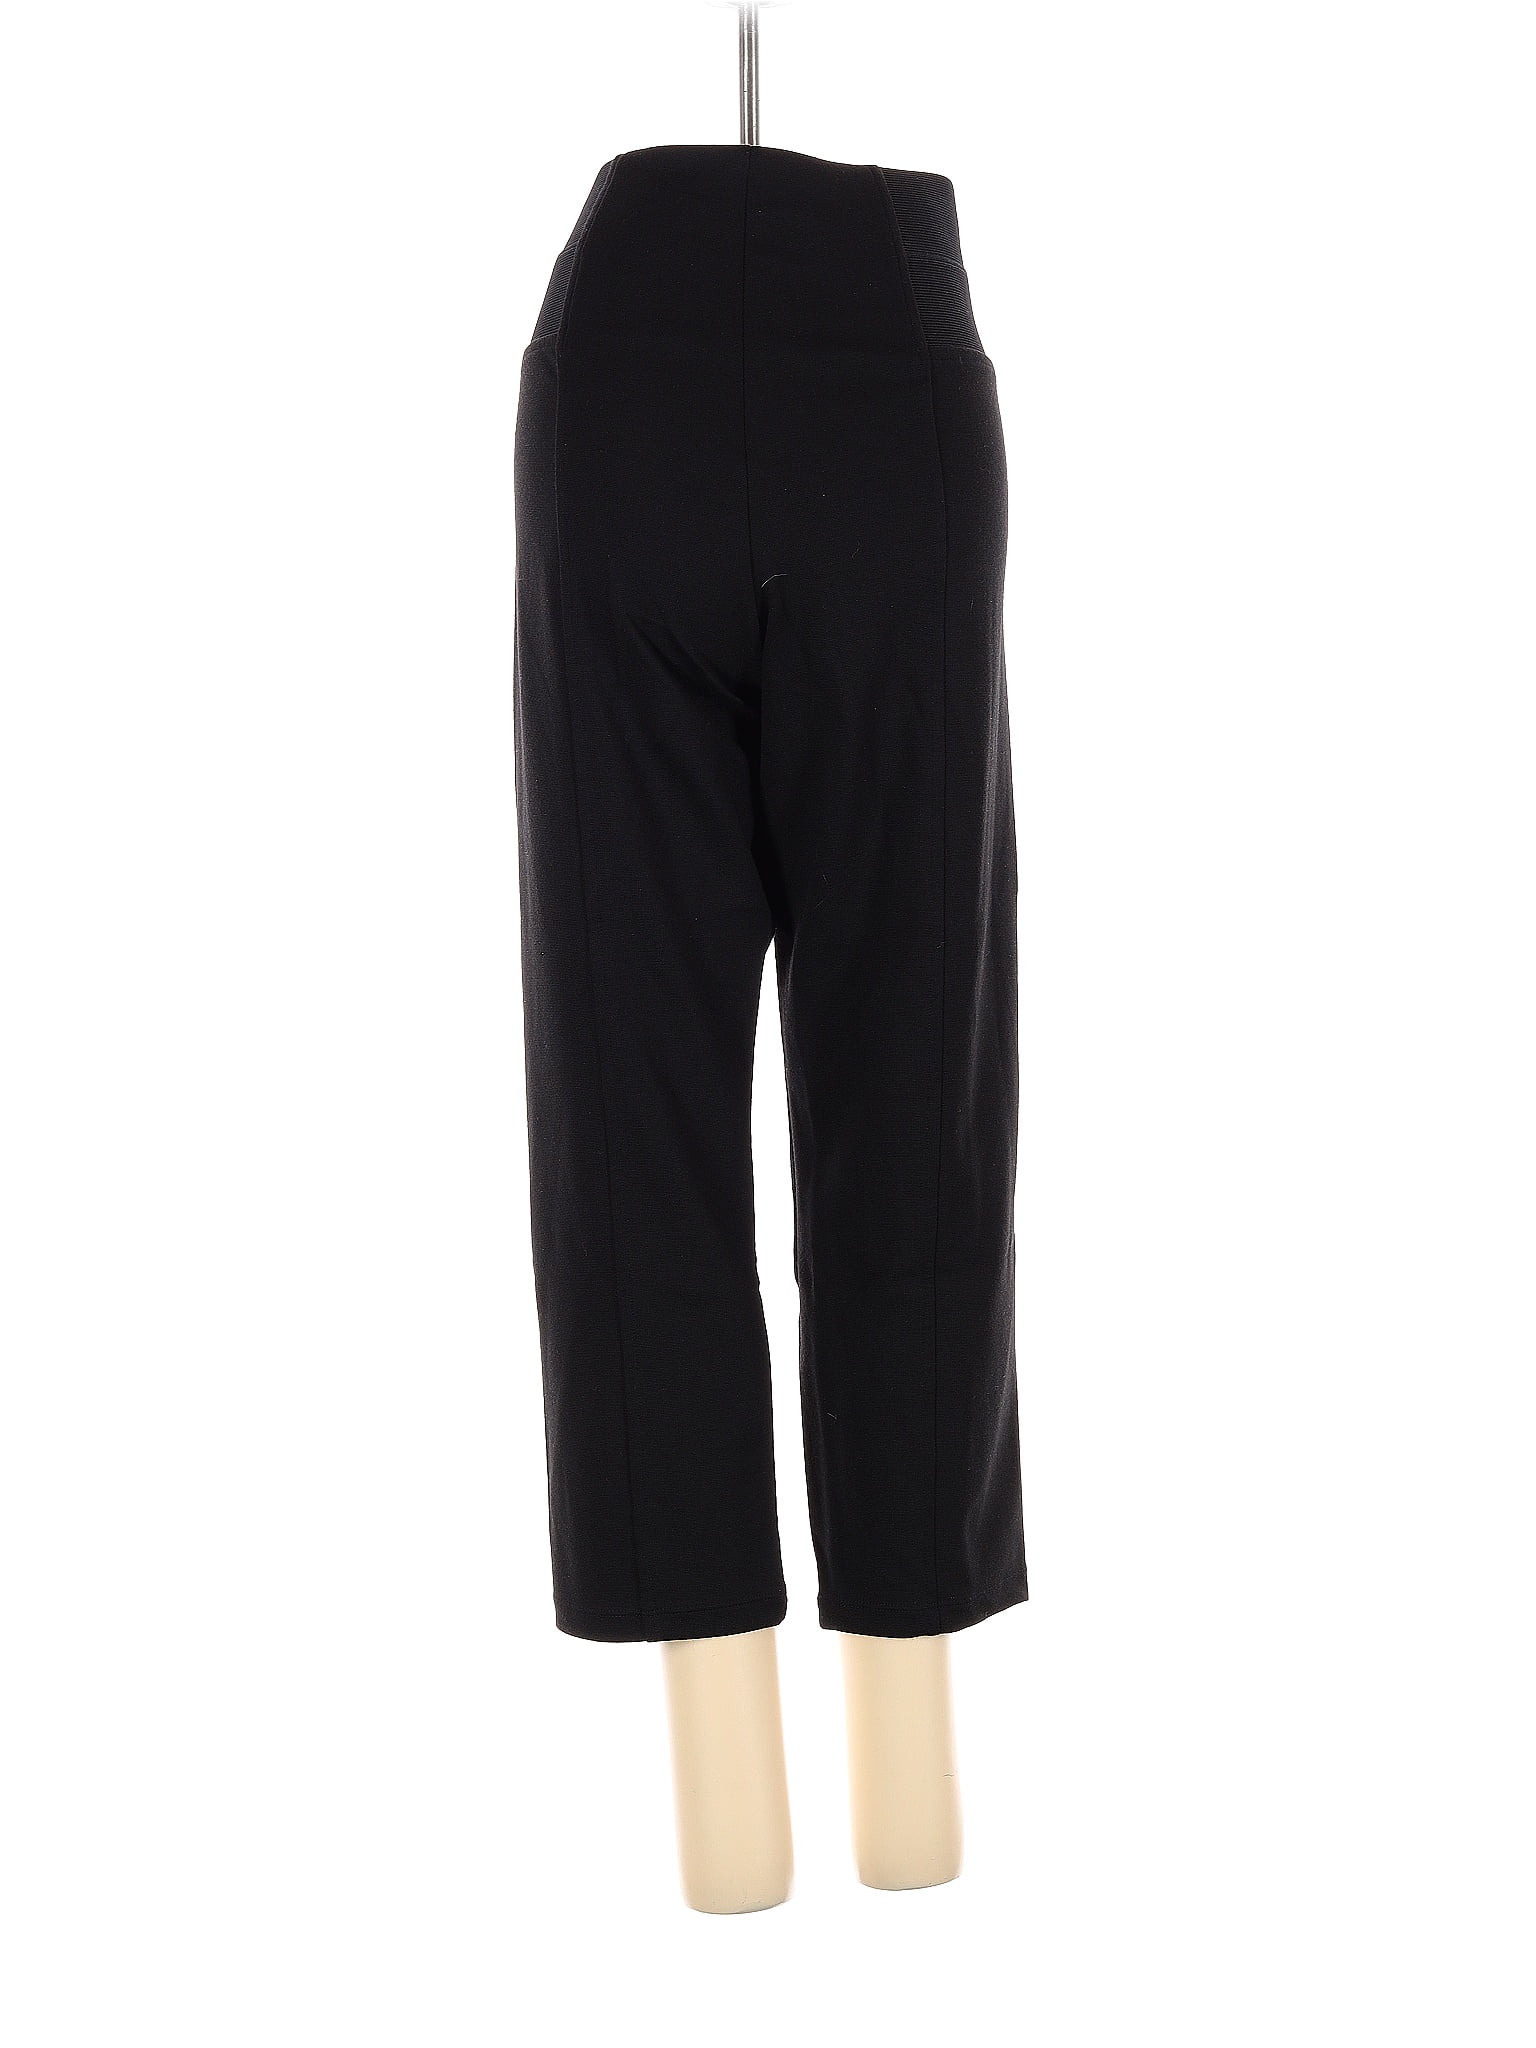 NWT Simply Noelle Womens Black Casual Pants Size L /XL